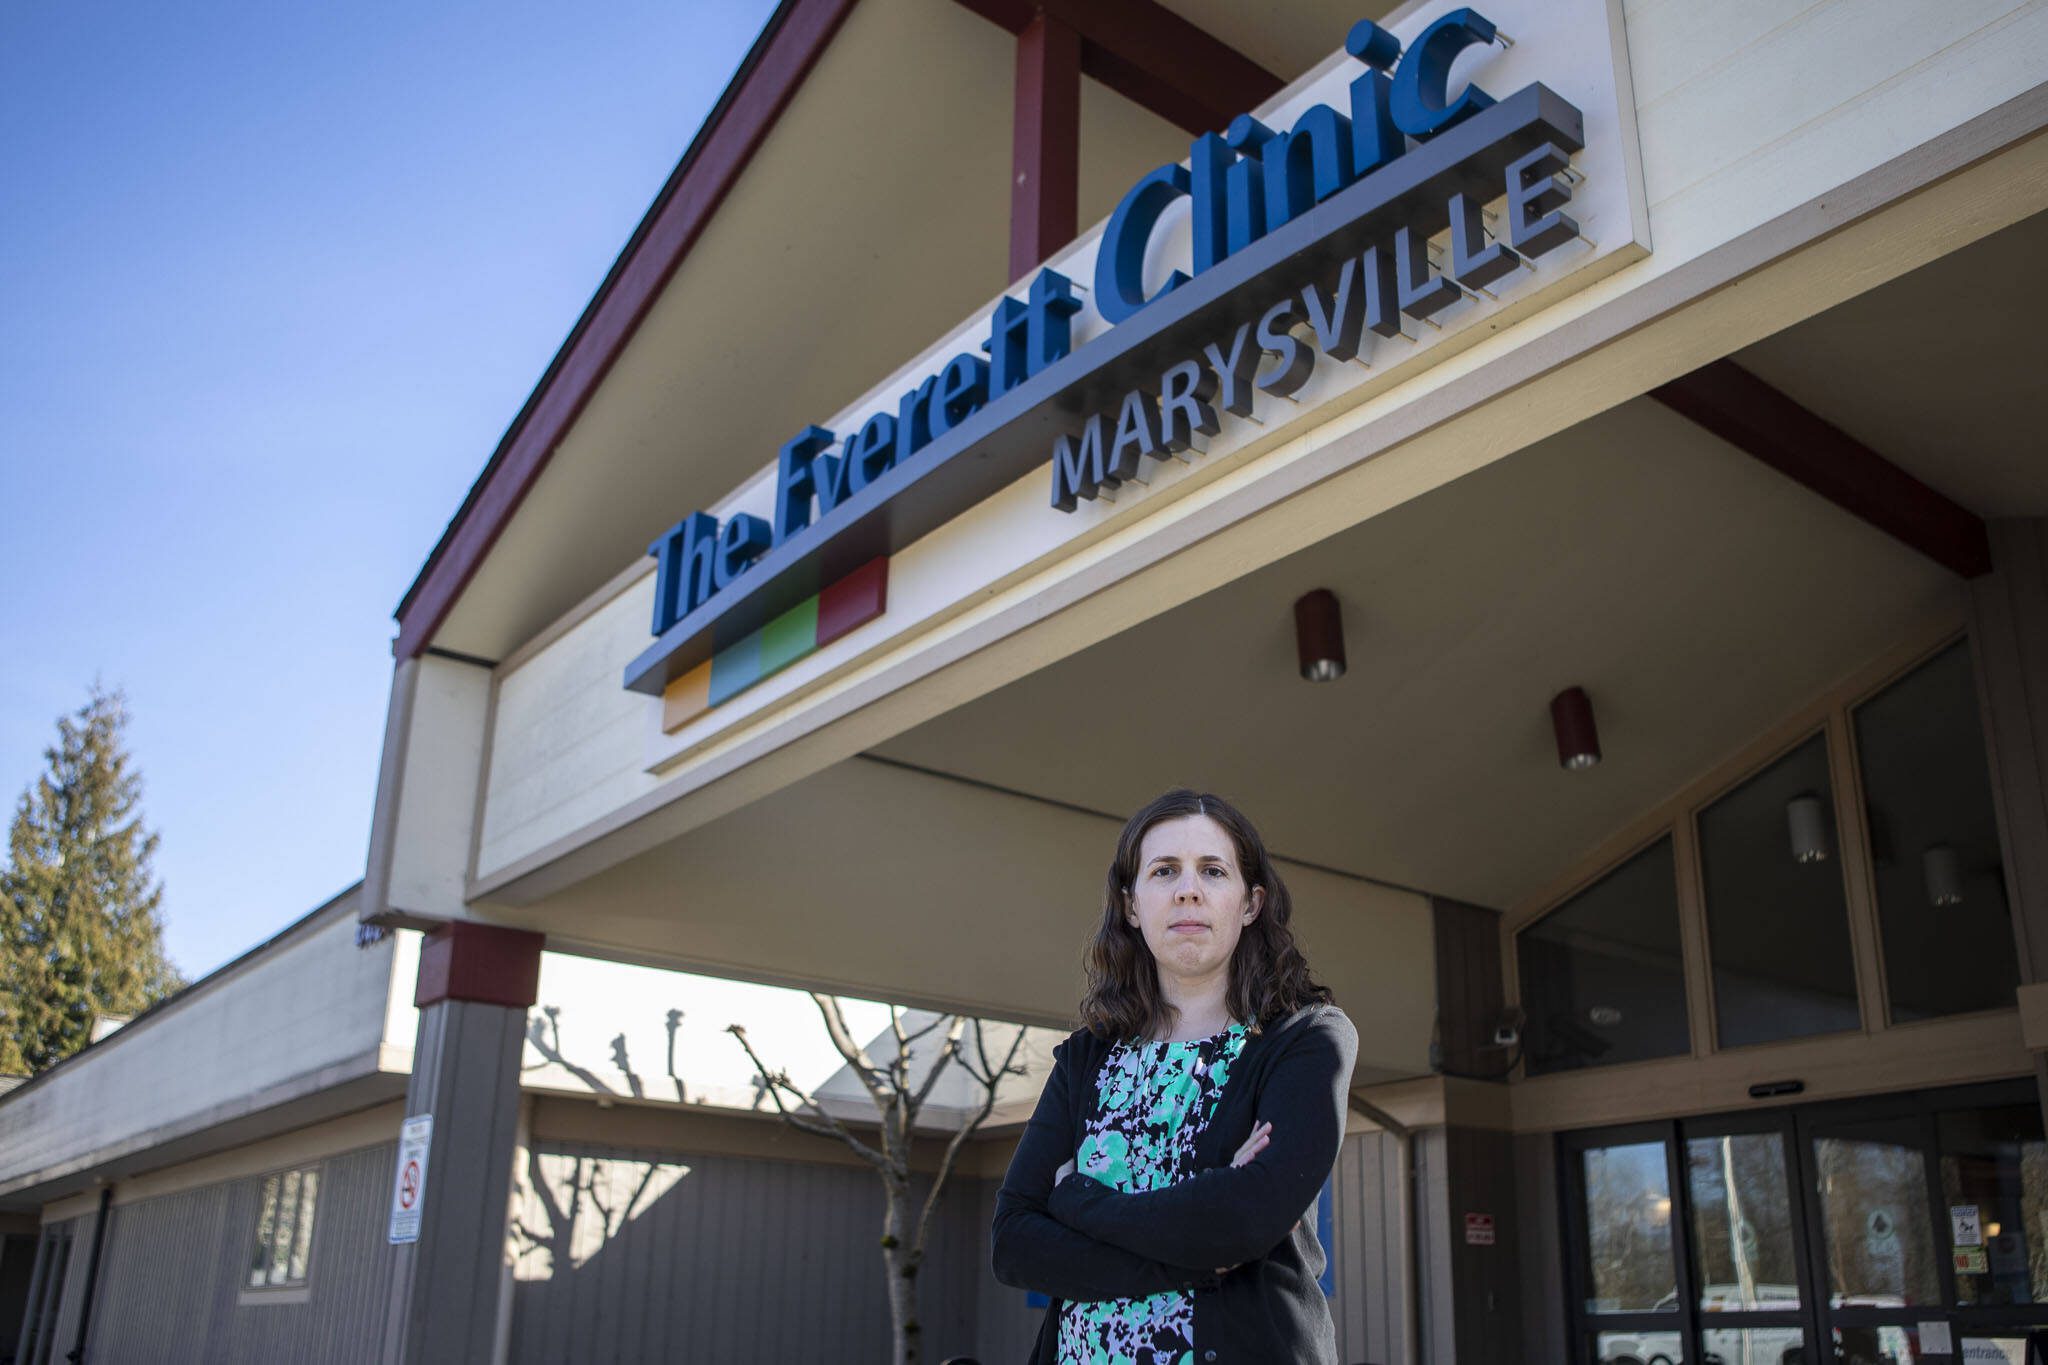 Kate Spencer poses for a photo outside The Everett Clinic in Marysville, Washington on Tuesday, March 21, 2023. Spencer is a deaf patient who has struggled with access challenges at The Everett Clinic. (Annie Barker / The Herald)